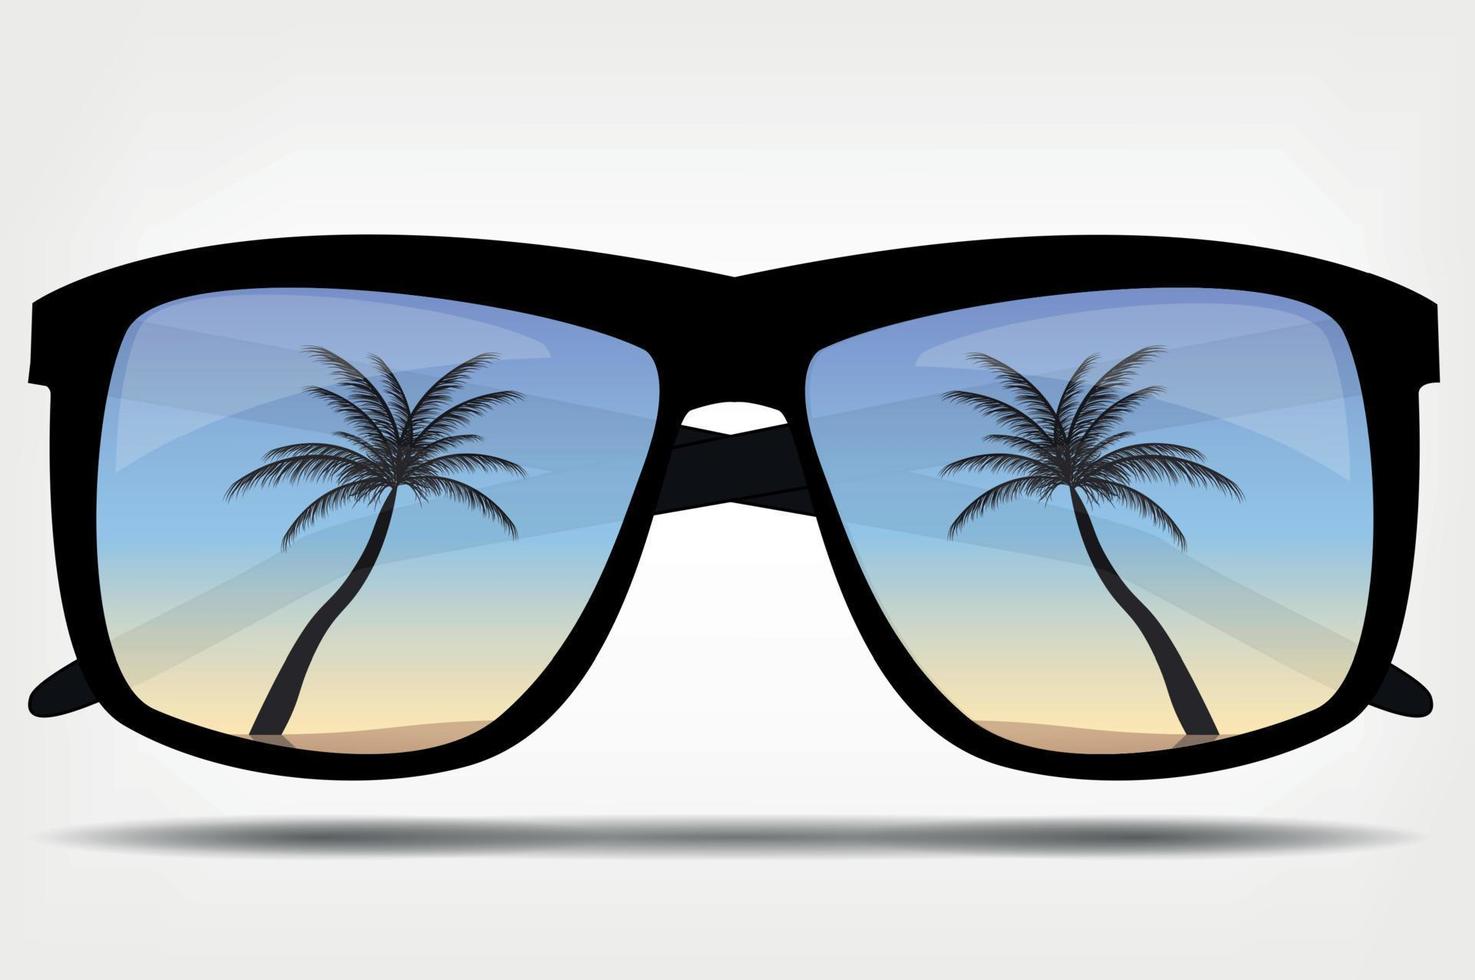 Sunglasses with a palm tree vector illustration